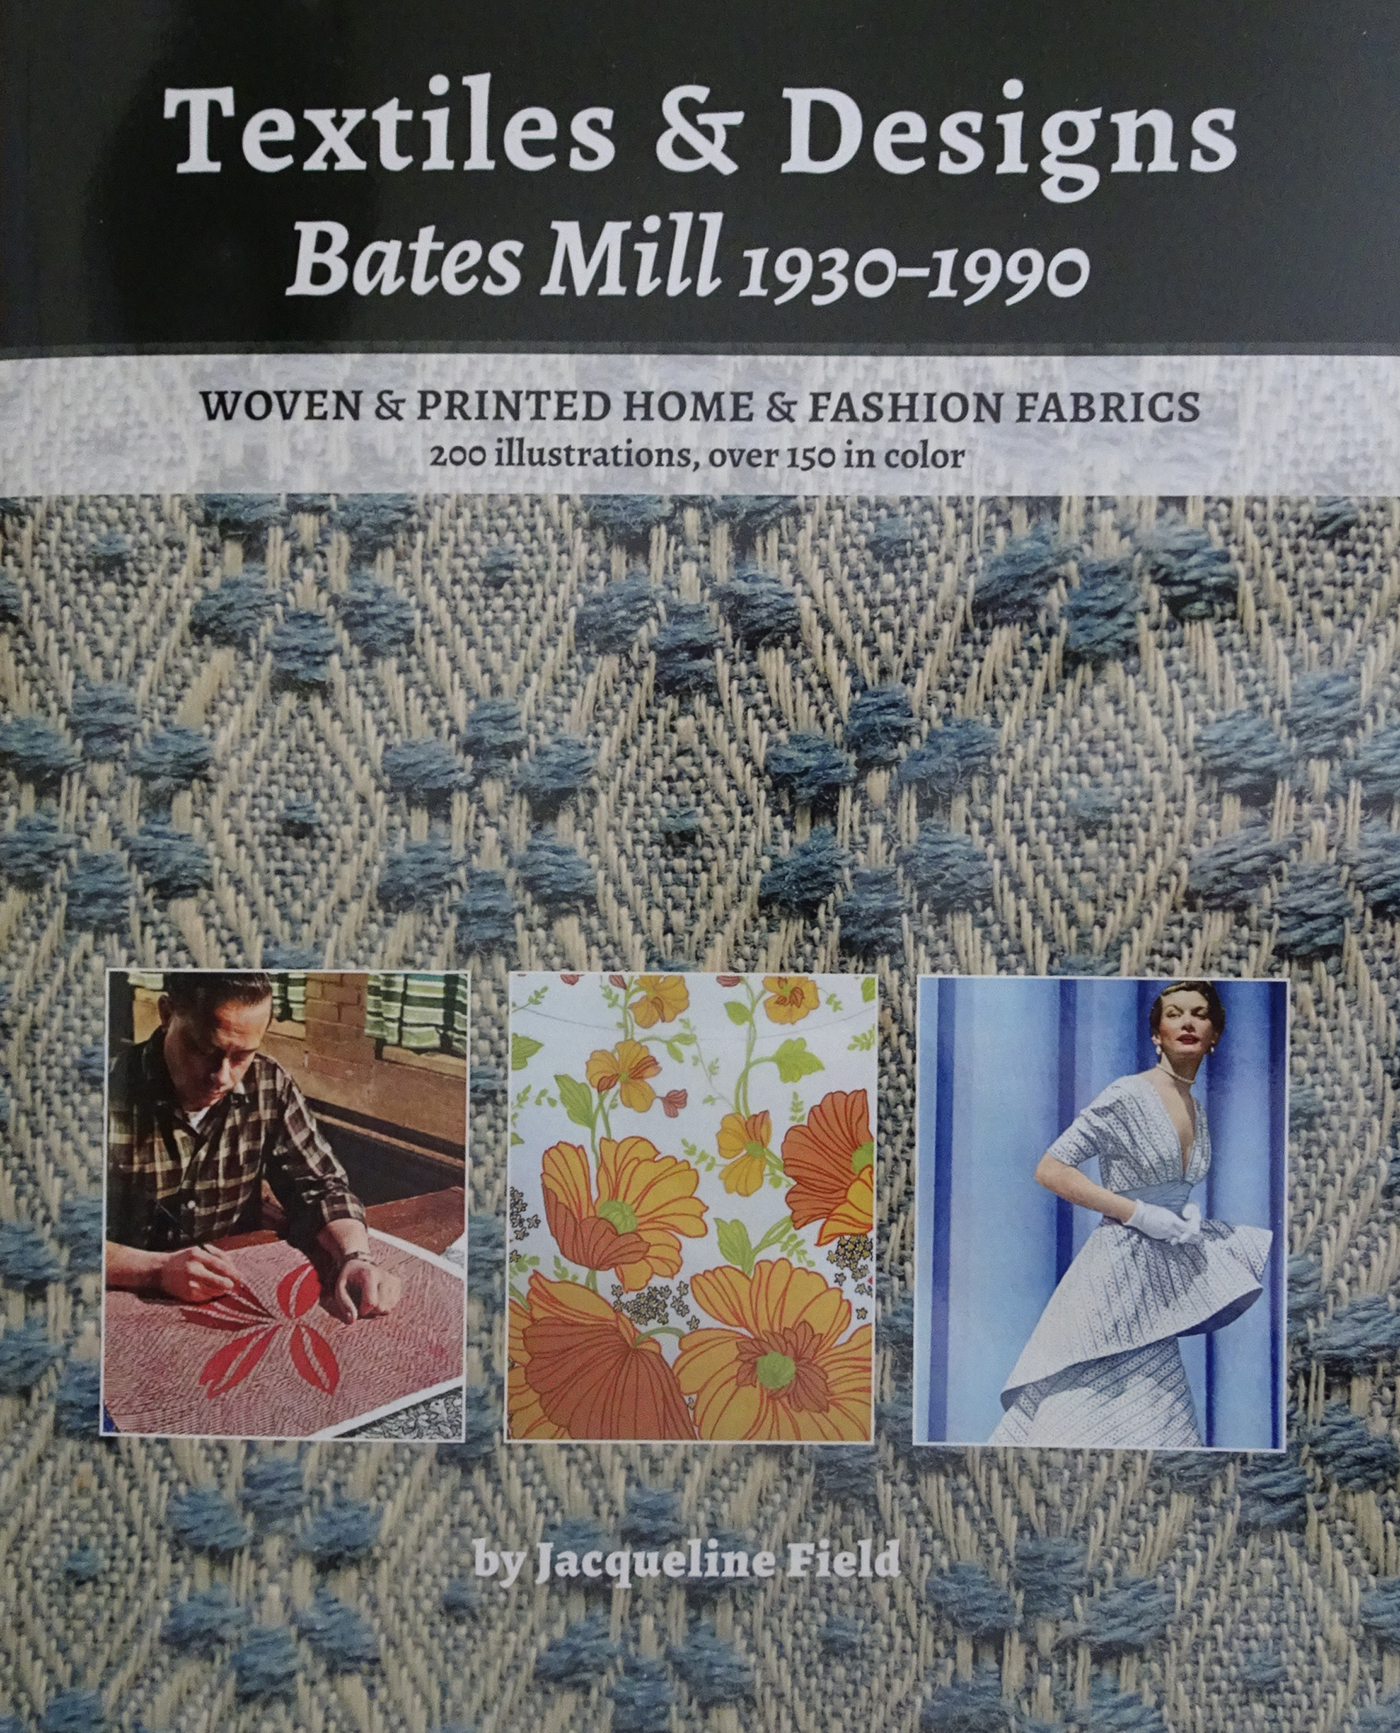 Book Announcement:  "Textiles & Design: Bates Mill 1930-1990. Woven & Printed Home & Fashion Fabrics" by Jacqueline Field